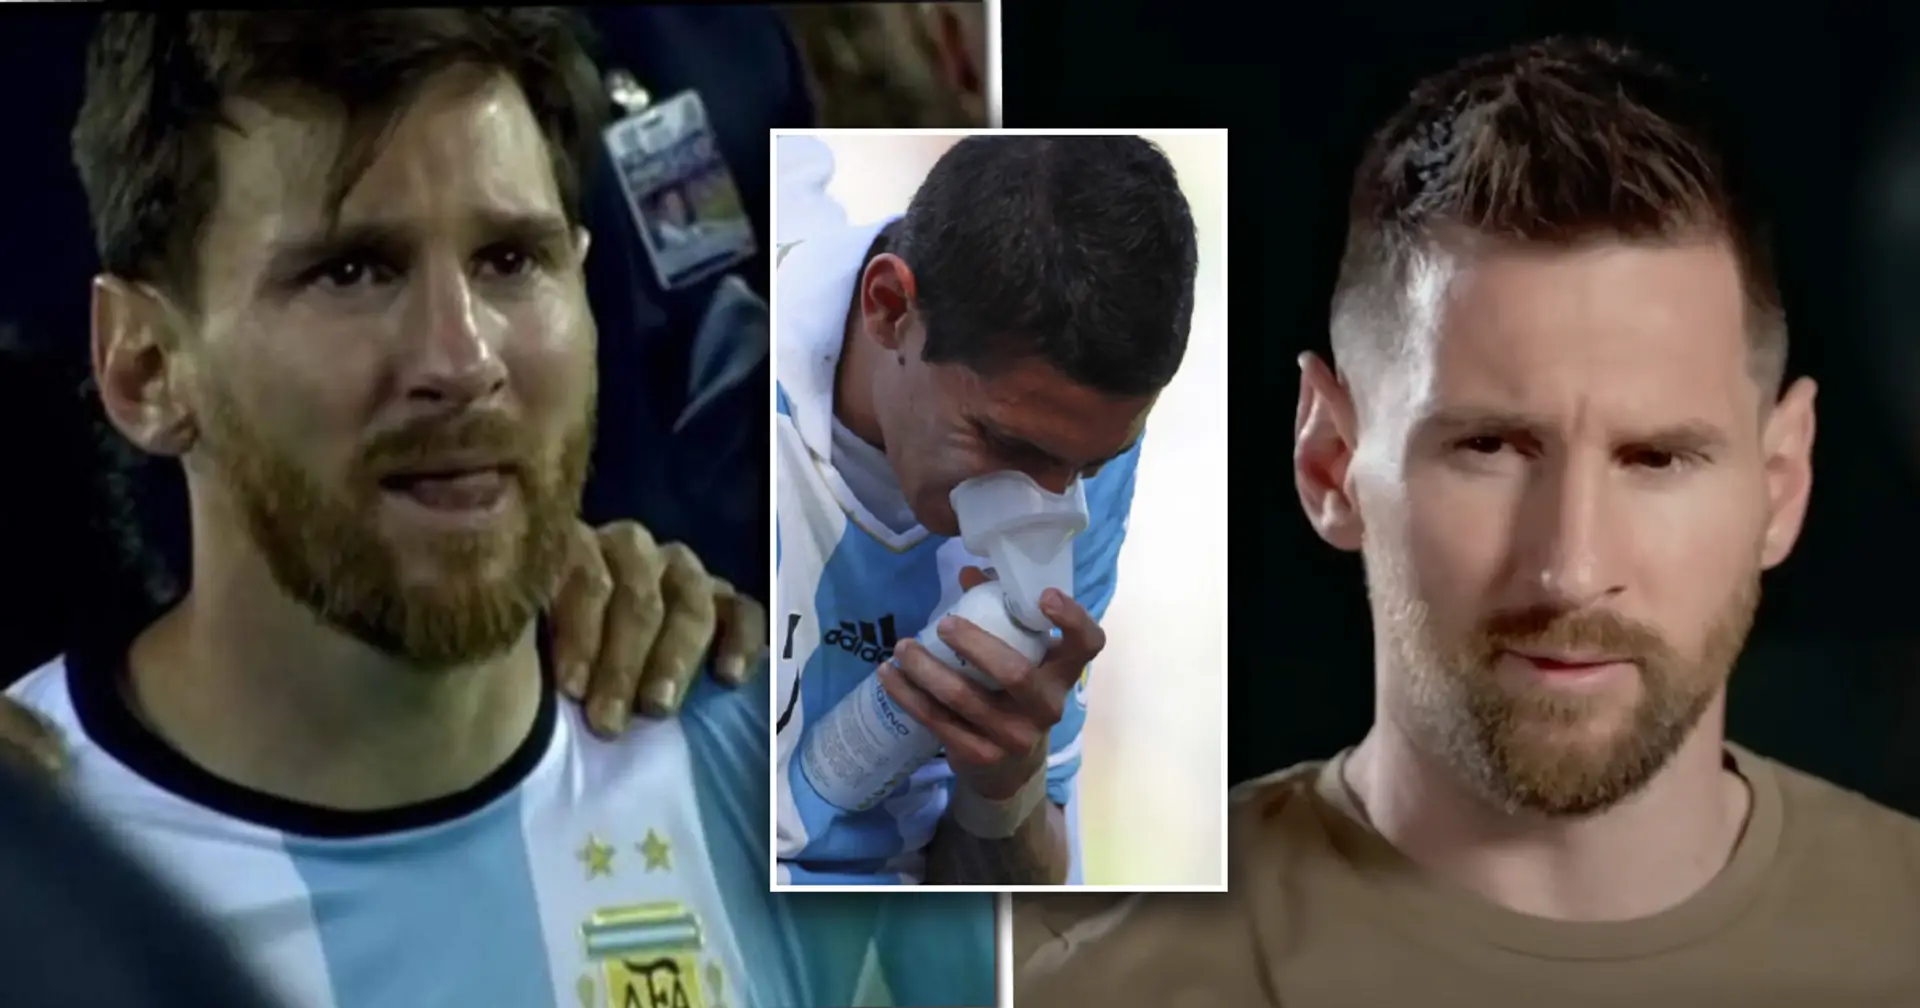 0 G/A, two defeats: One place Leo Messi hates playing in — he's physically sick to do so